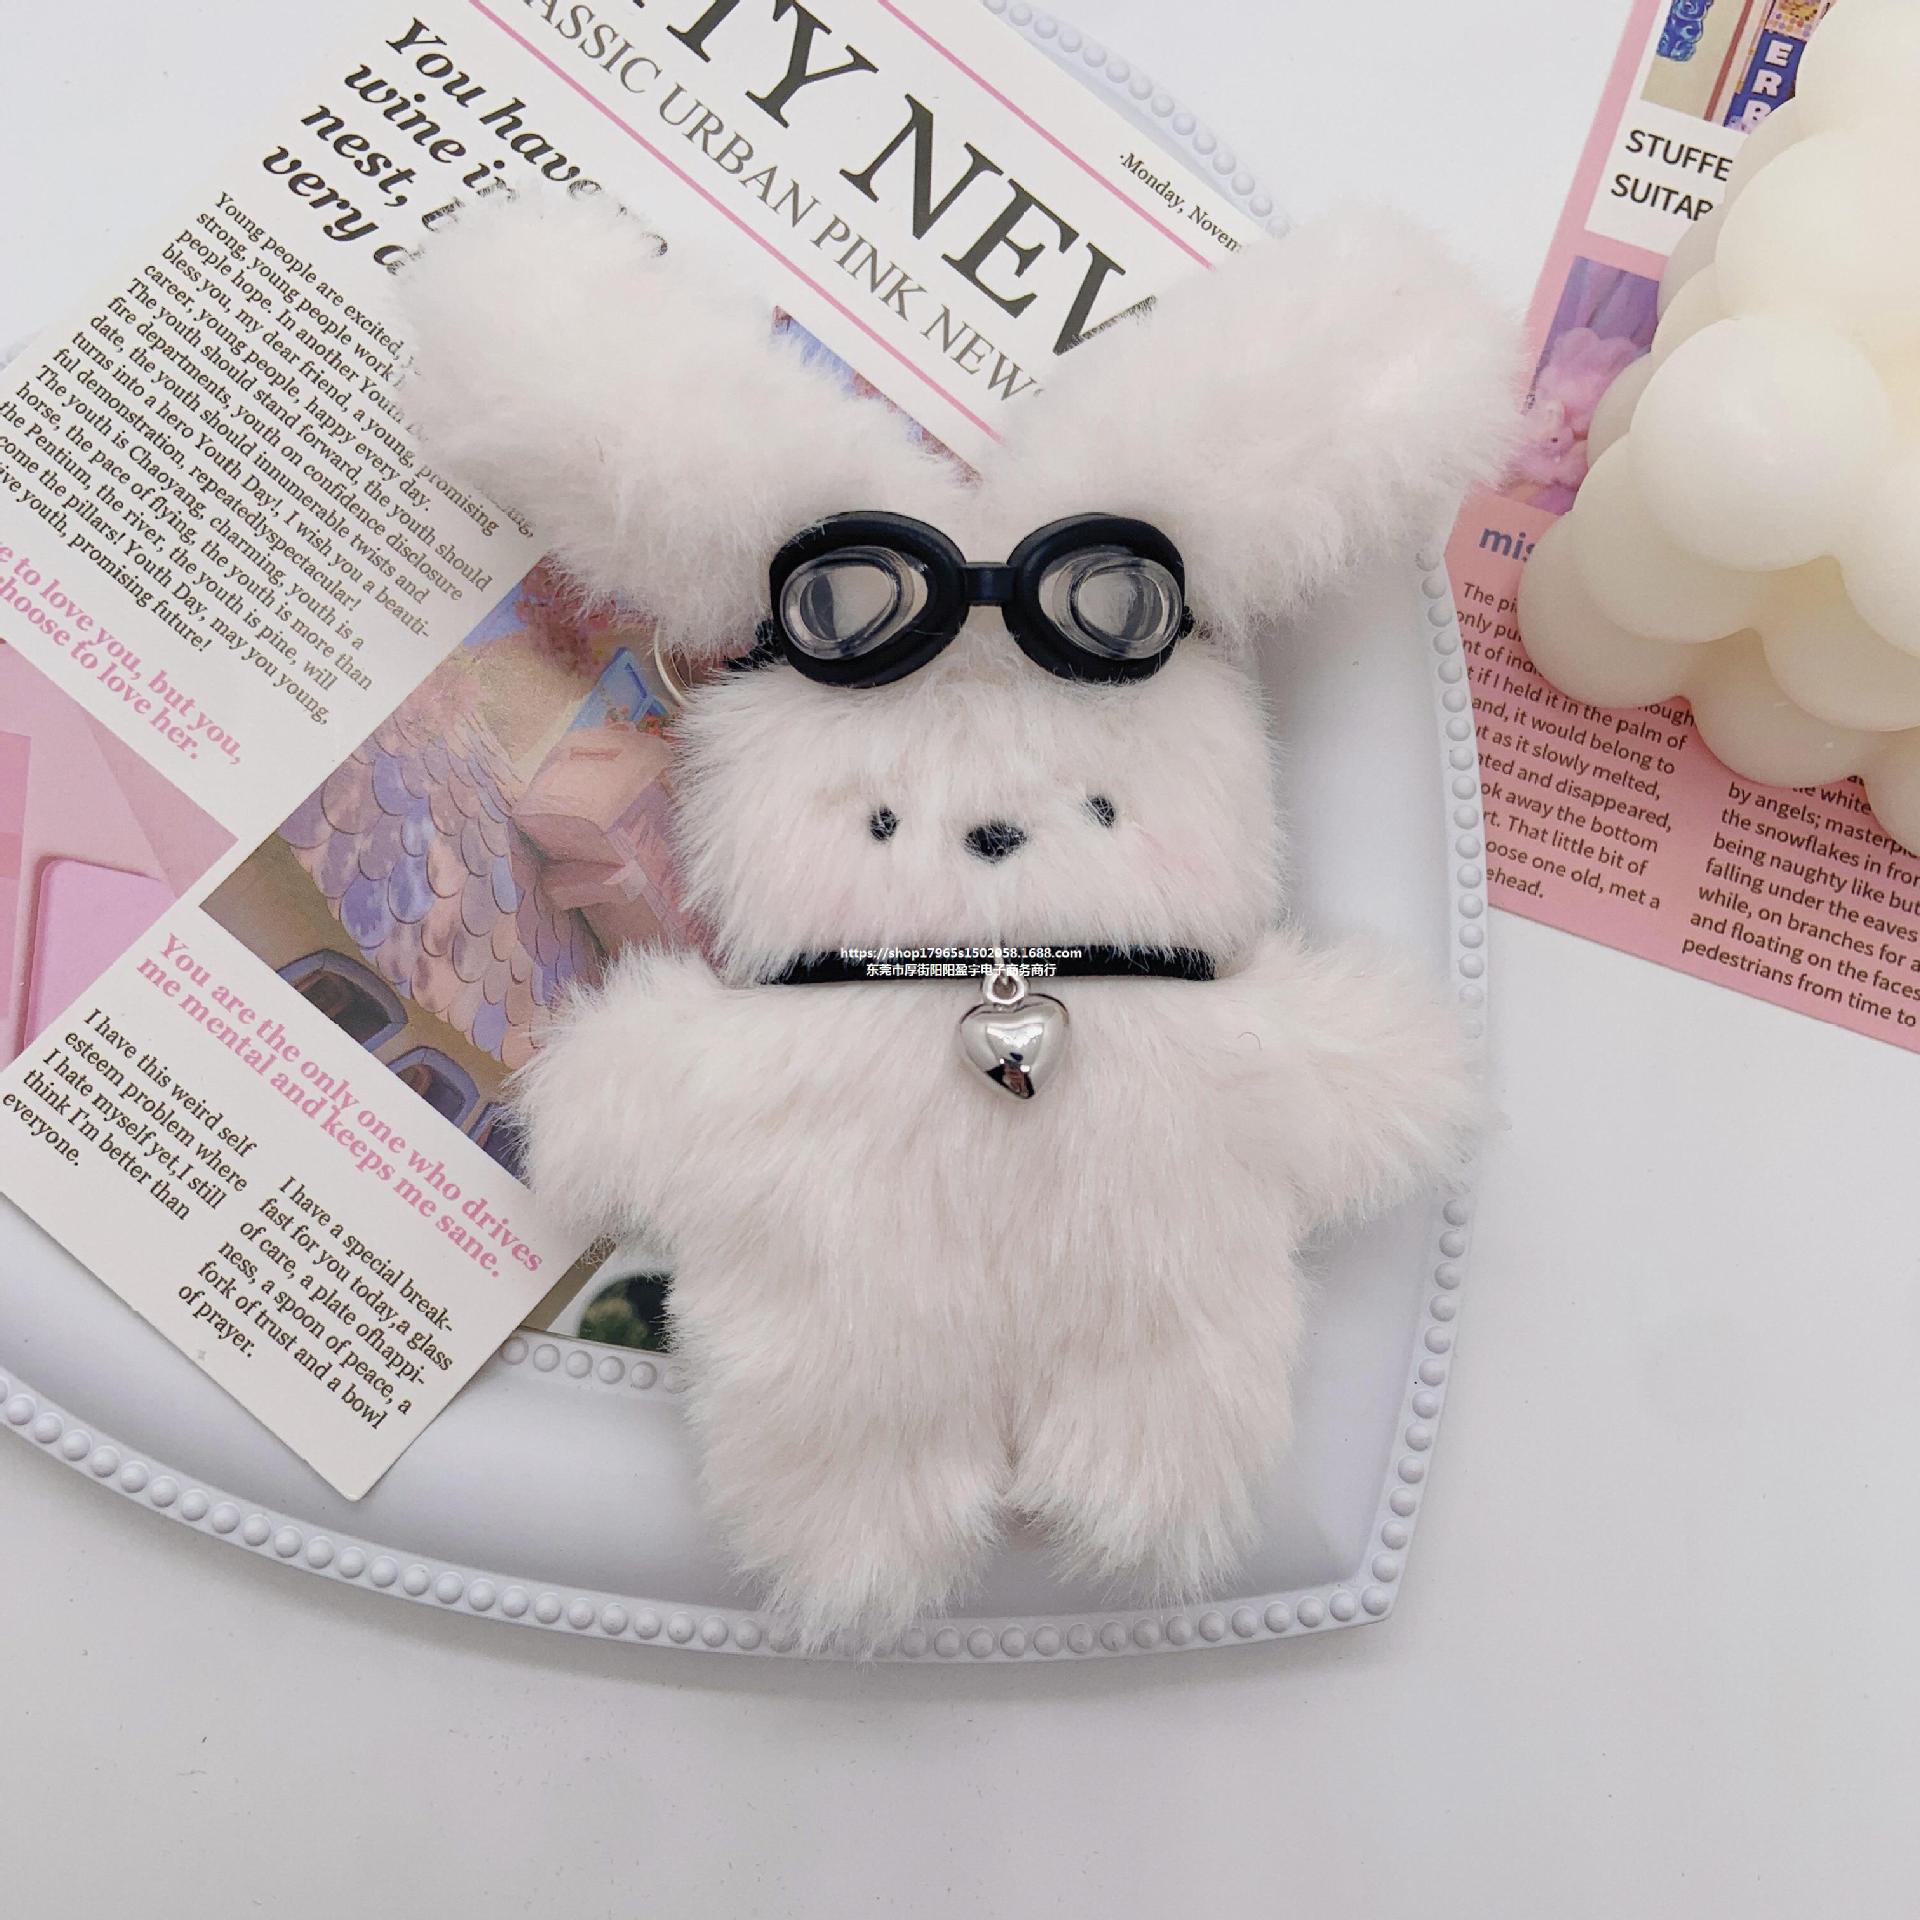 Spectacled puppy plush toy hanging on the table